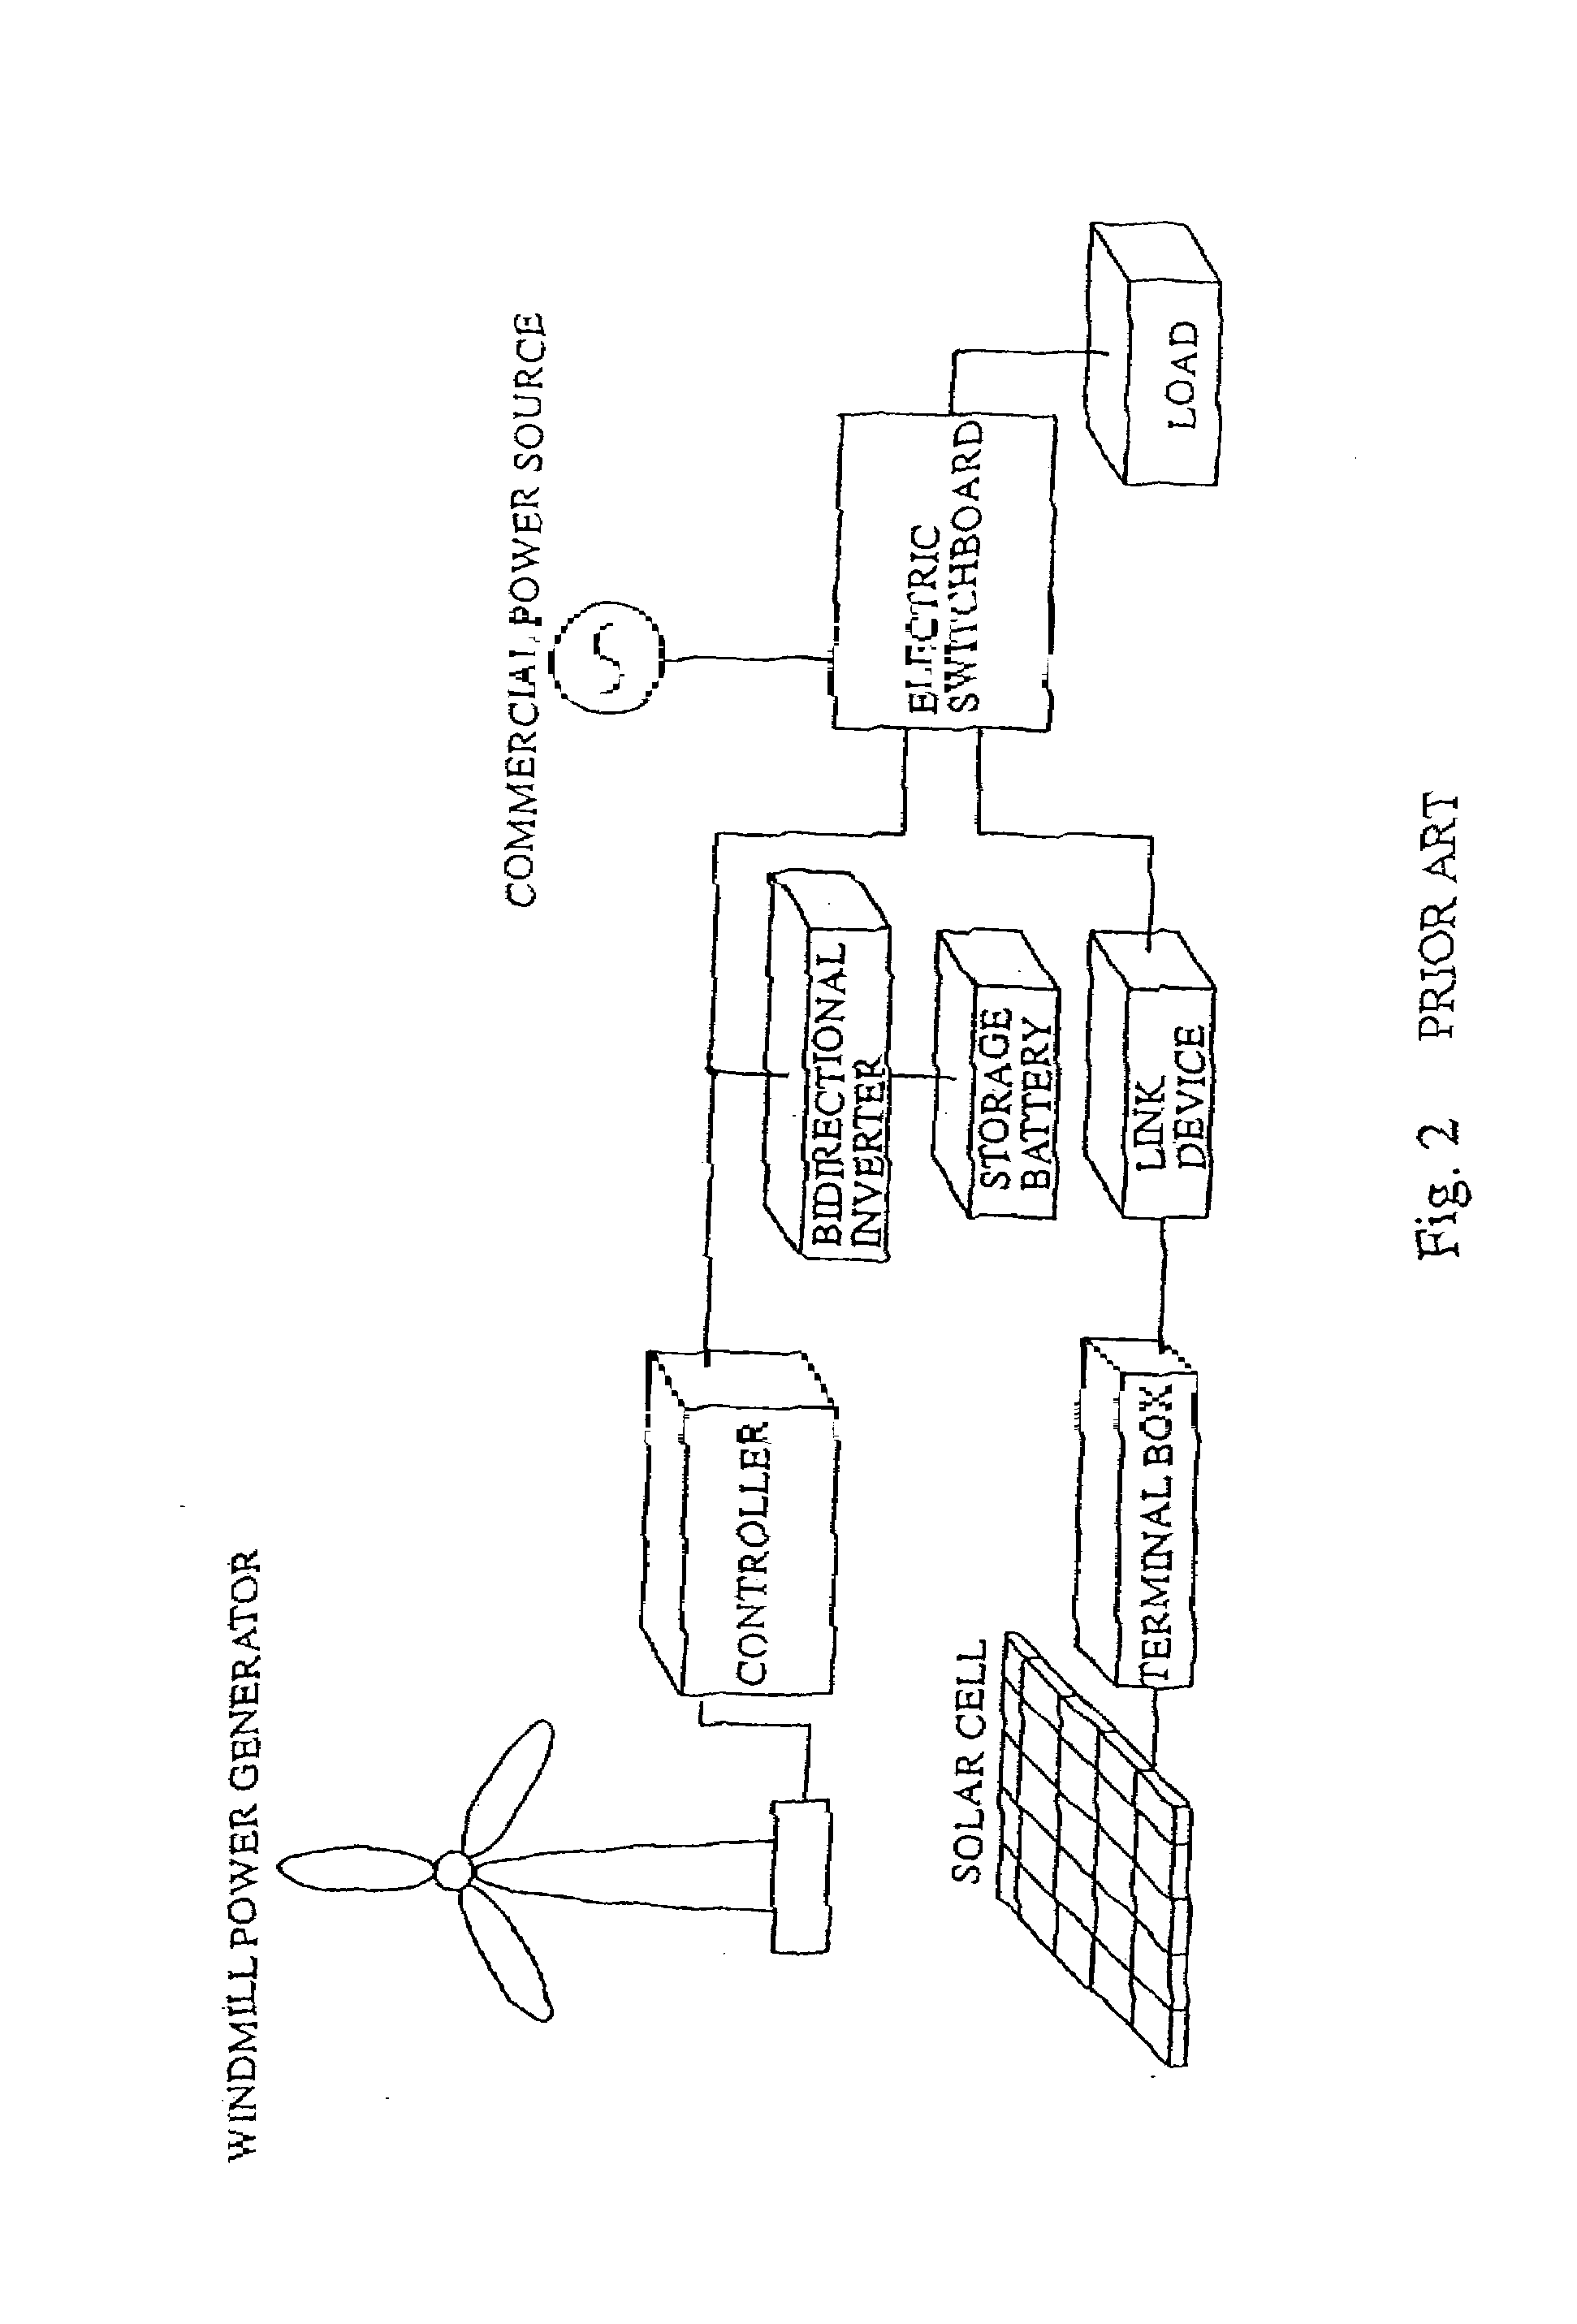 Co-generated power supply system